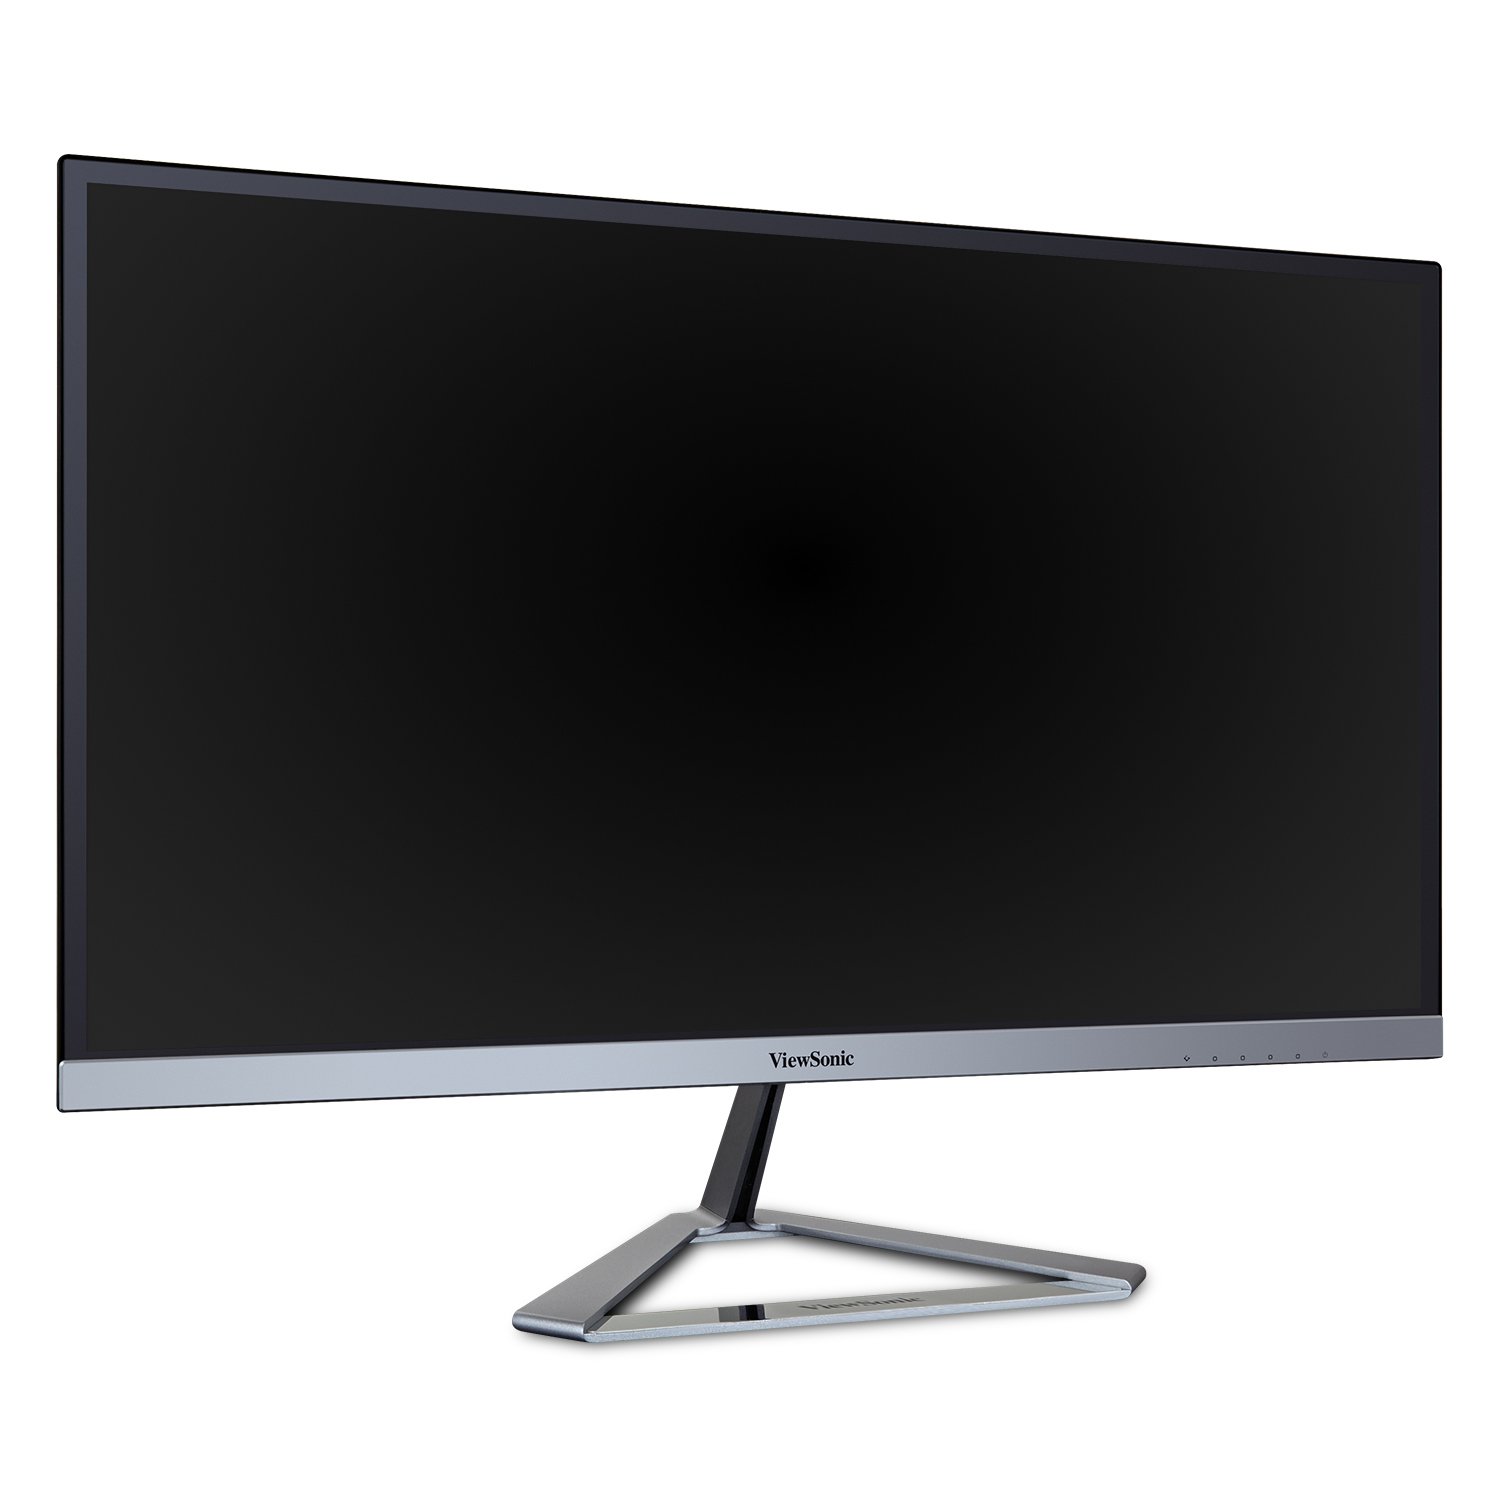 ViewSonic VX2276-SMHD 22 Inch 1080p Widescreen IPS Monitor with Ultra-Thin Bezels, HDMI and DisplayPort,Black/Silver